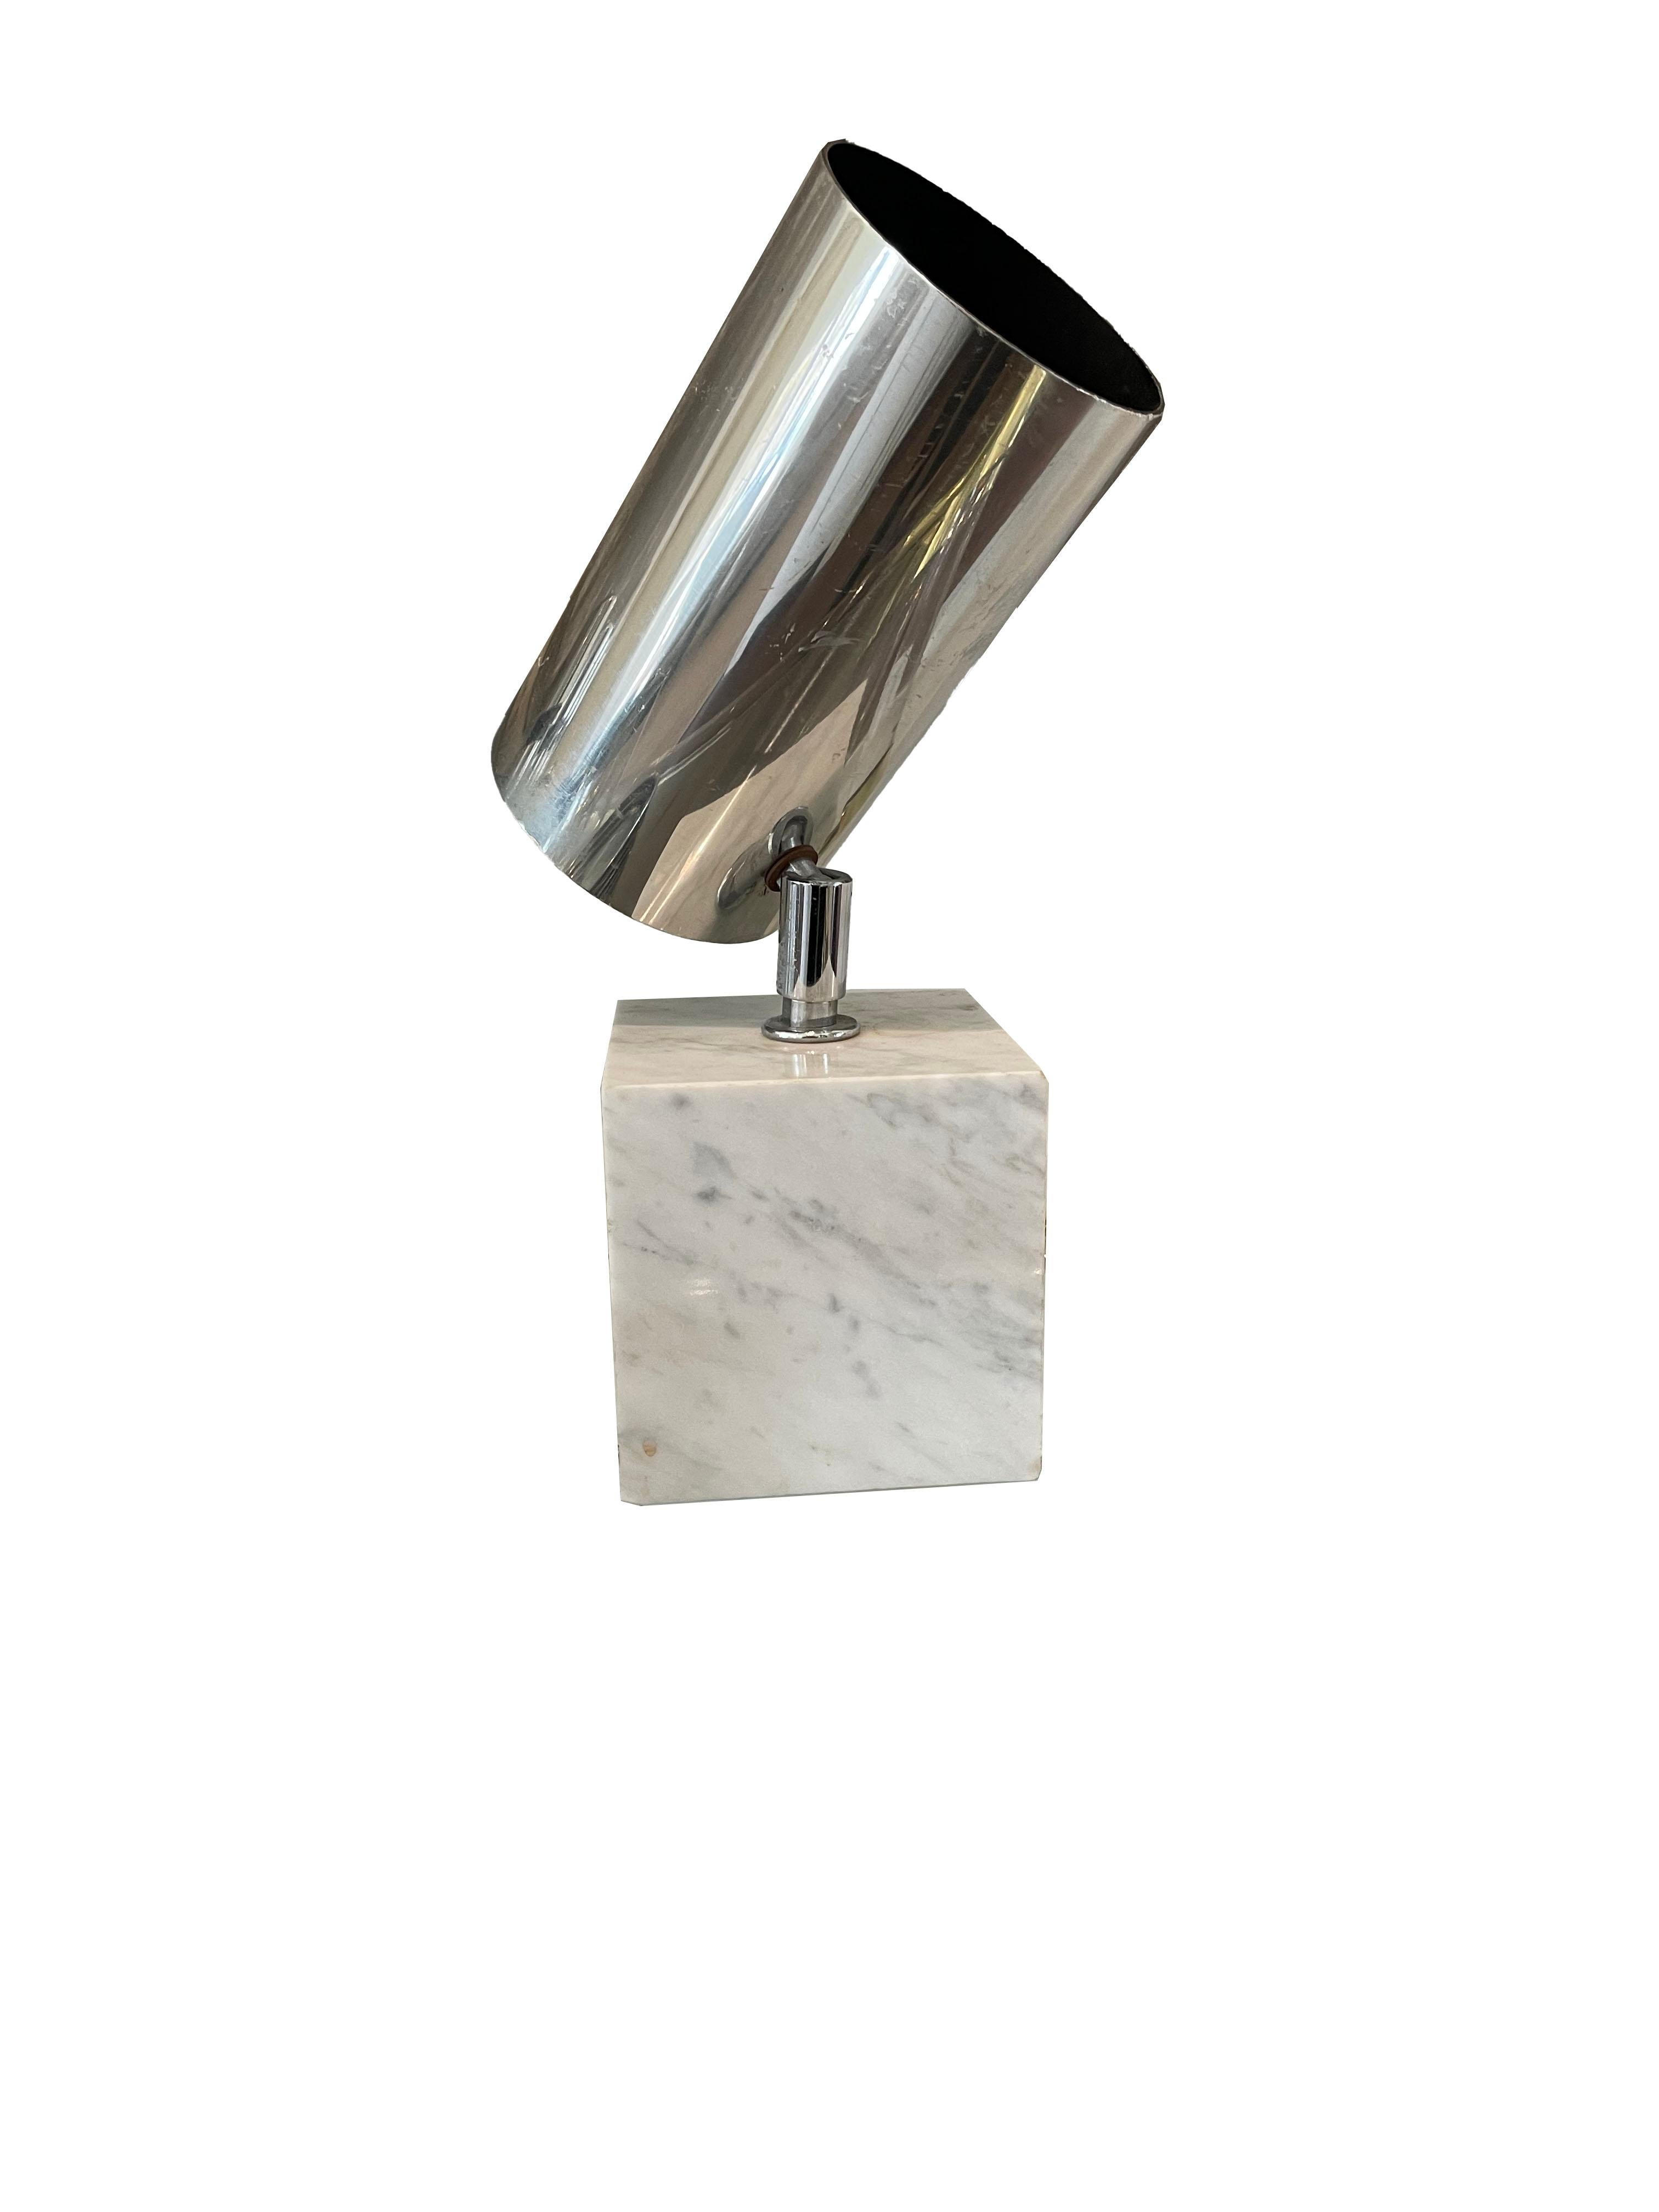 Vintage 1970's Carrara marble and chrome table lamp by Neal Small for Koch & Lowy. This Mid-Century Modern lamp pairs well with all styles and is in good condition.

 The overall dimensions are 8